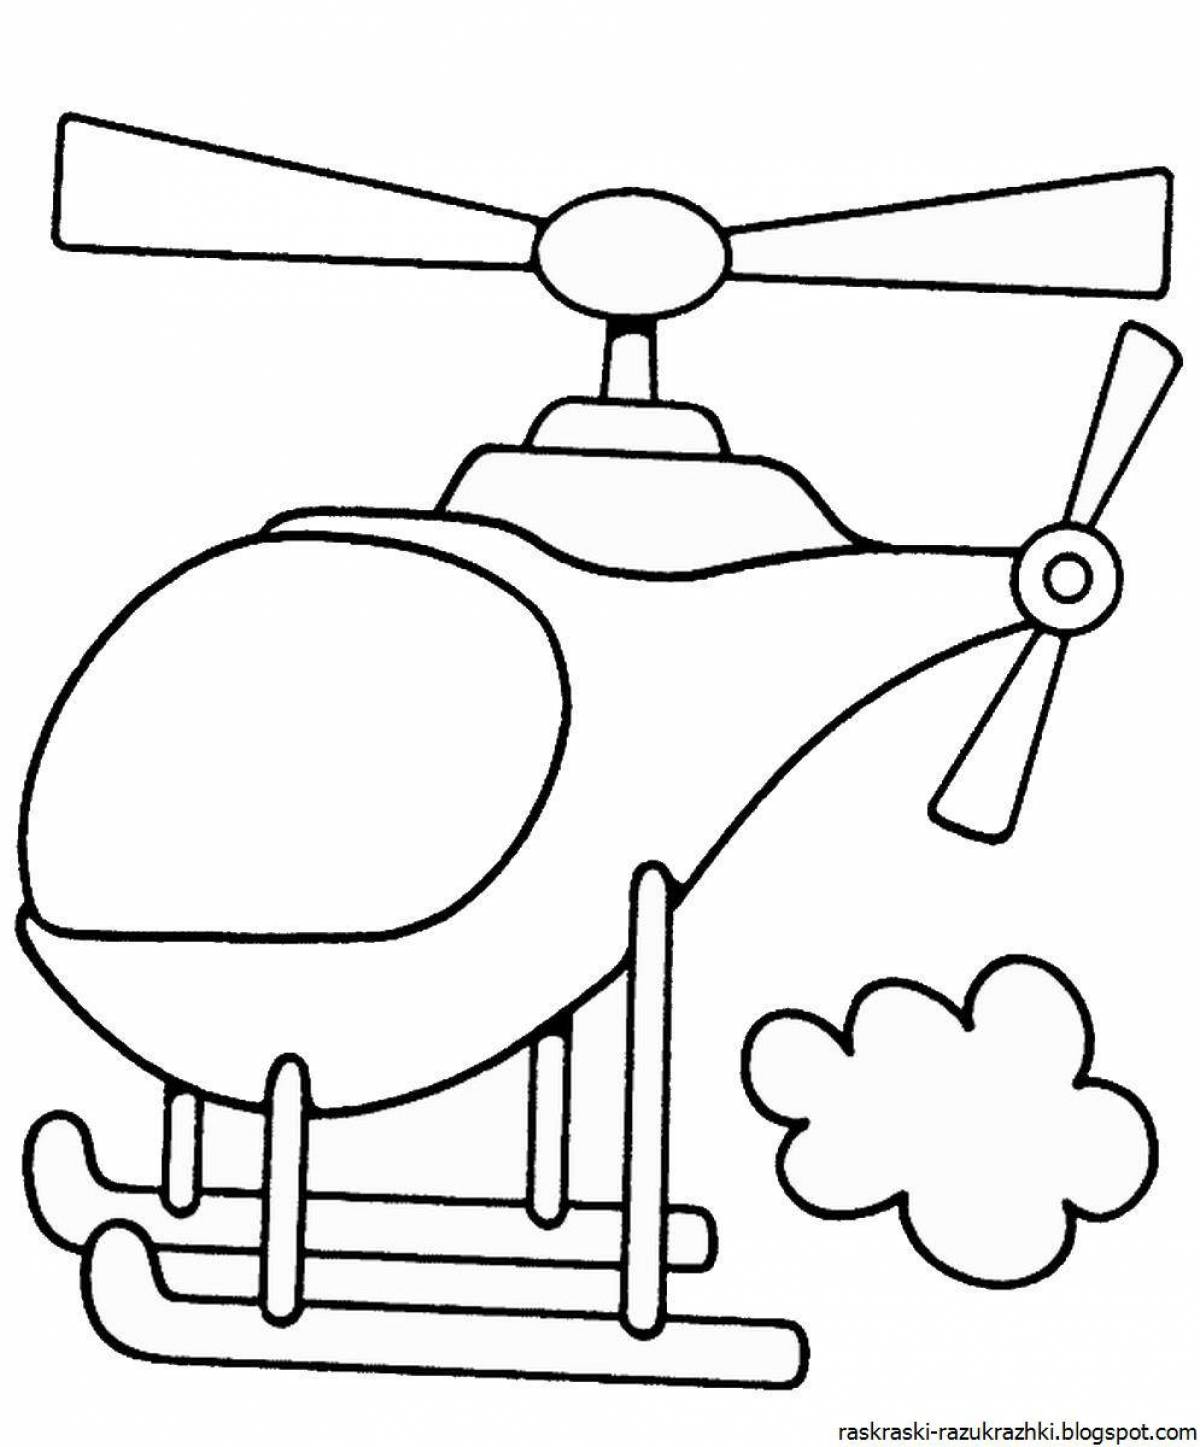 Awesome transport coloring book for 3-4 year olds